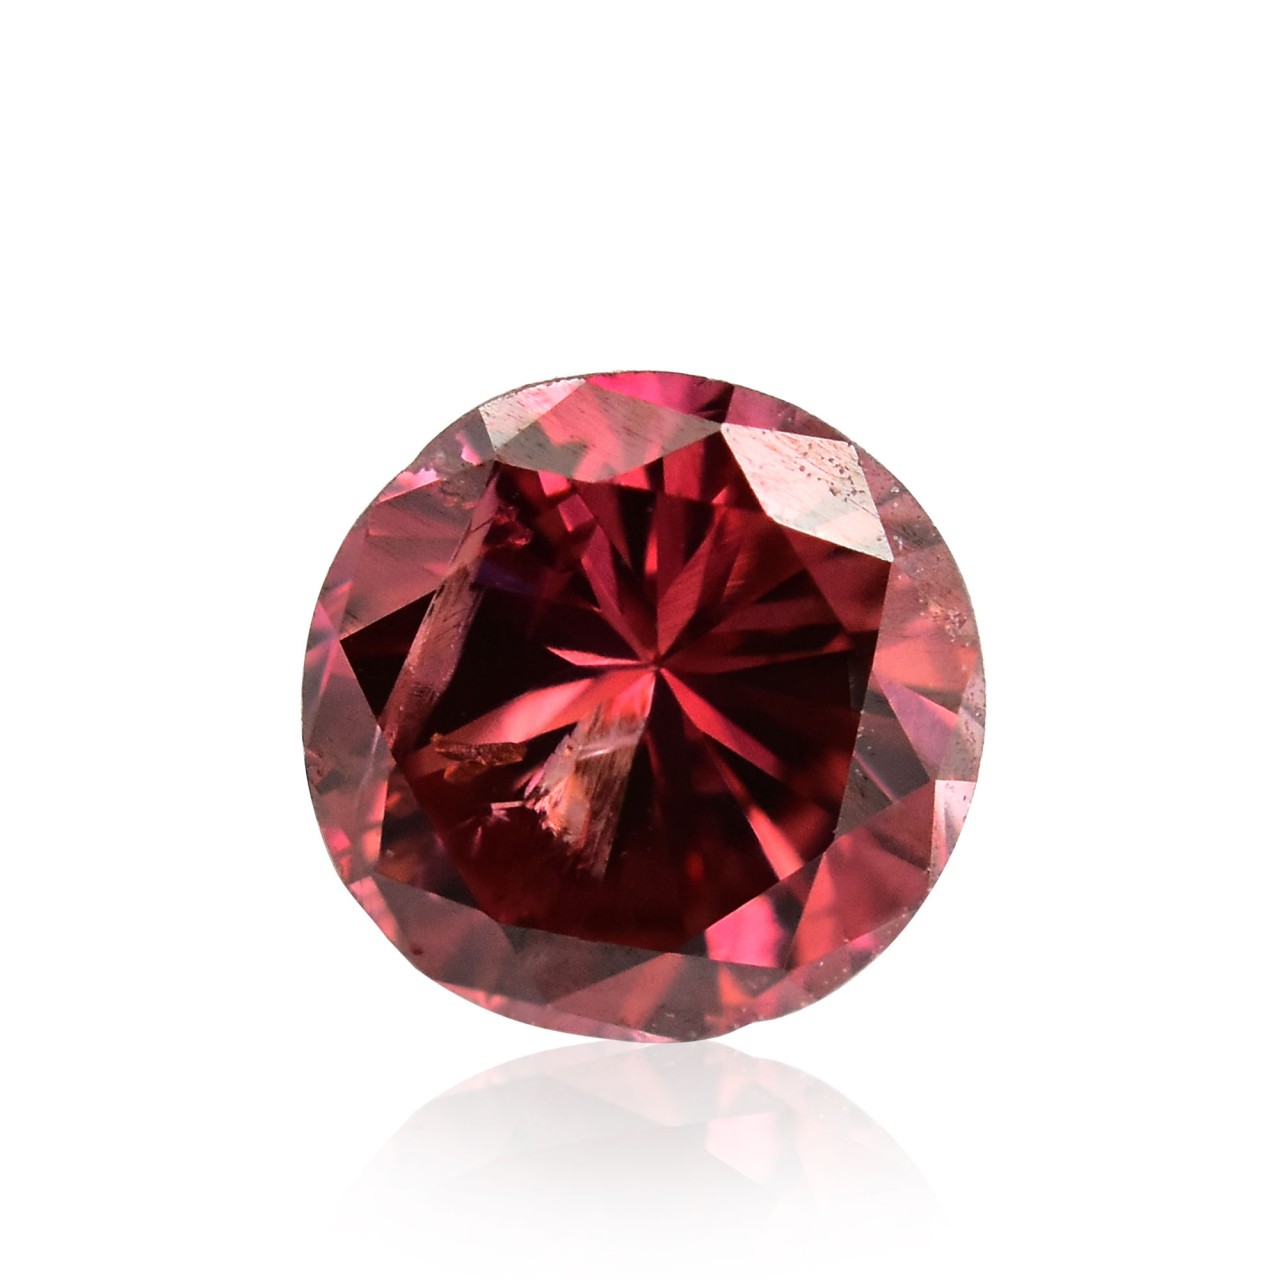 Red Diamond, Round Shape, (I1) Clarity, GIA, SKU 312941 and other loose dia...